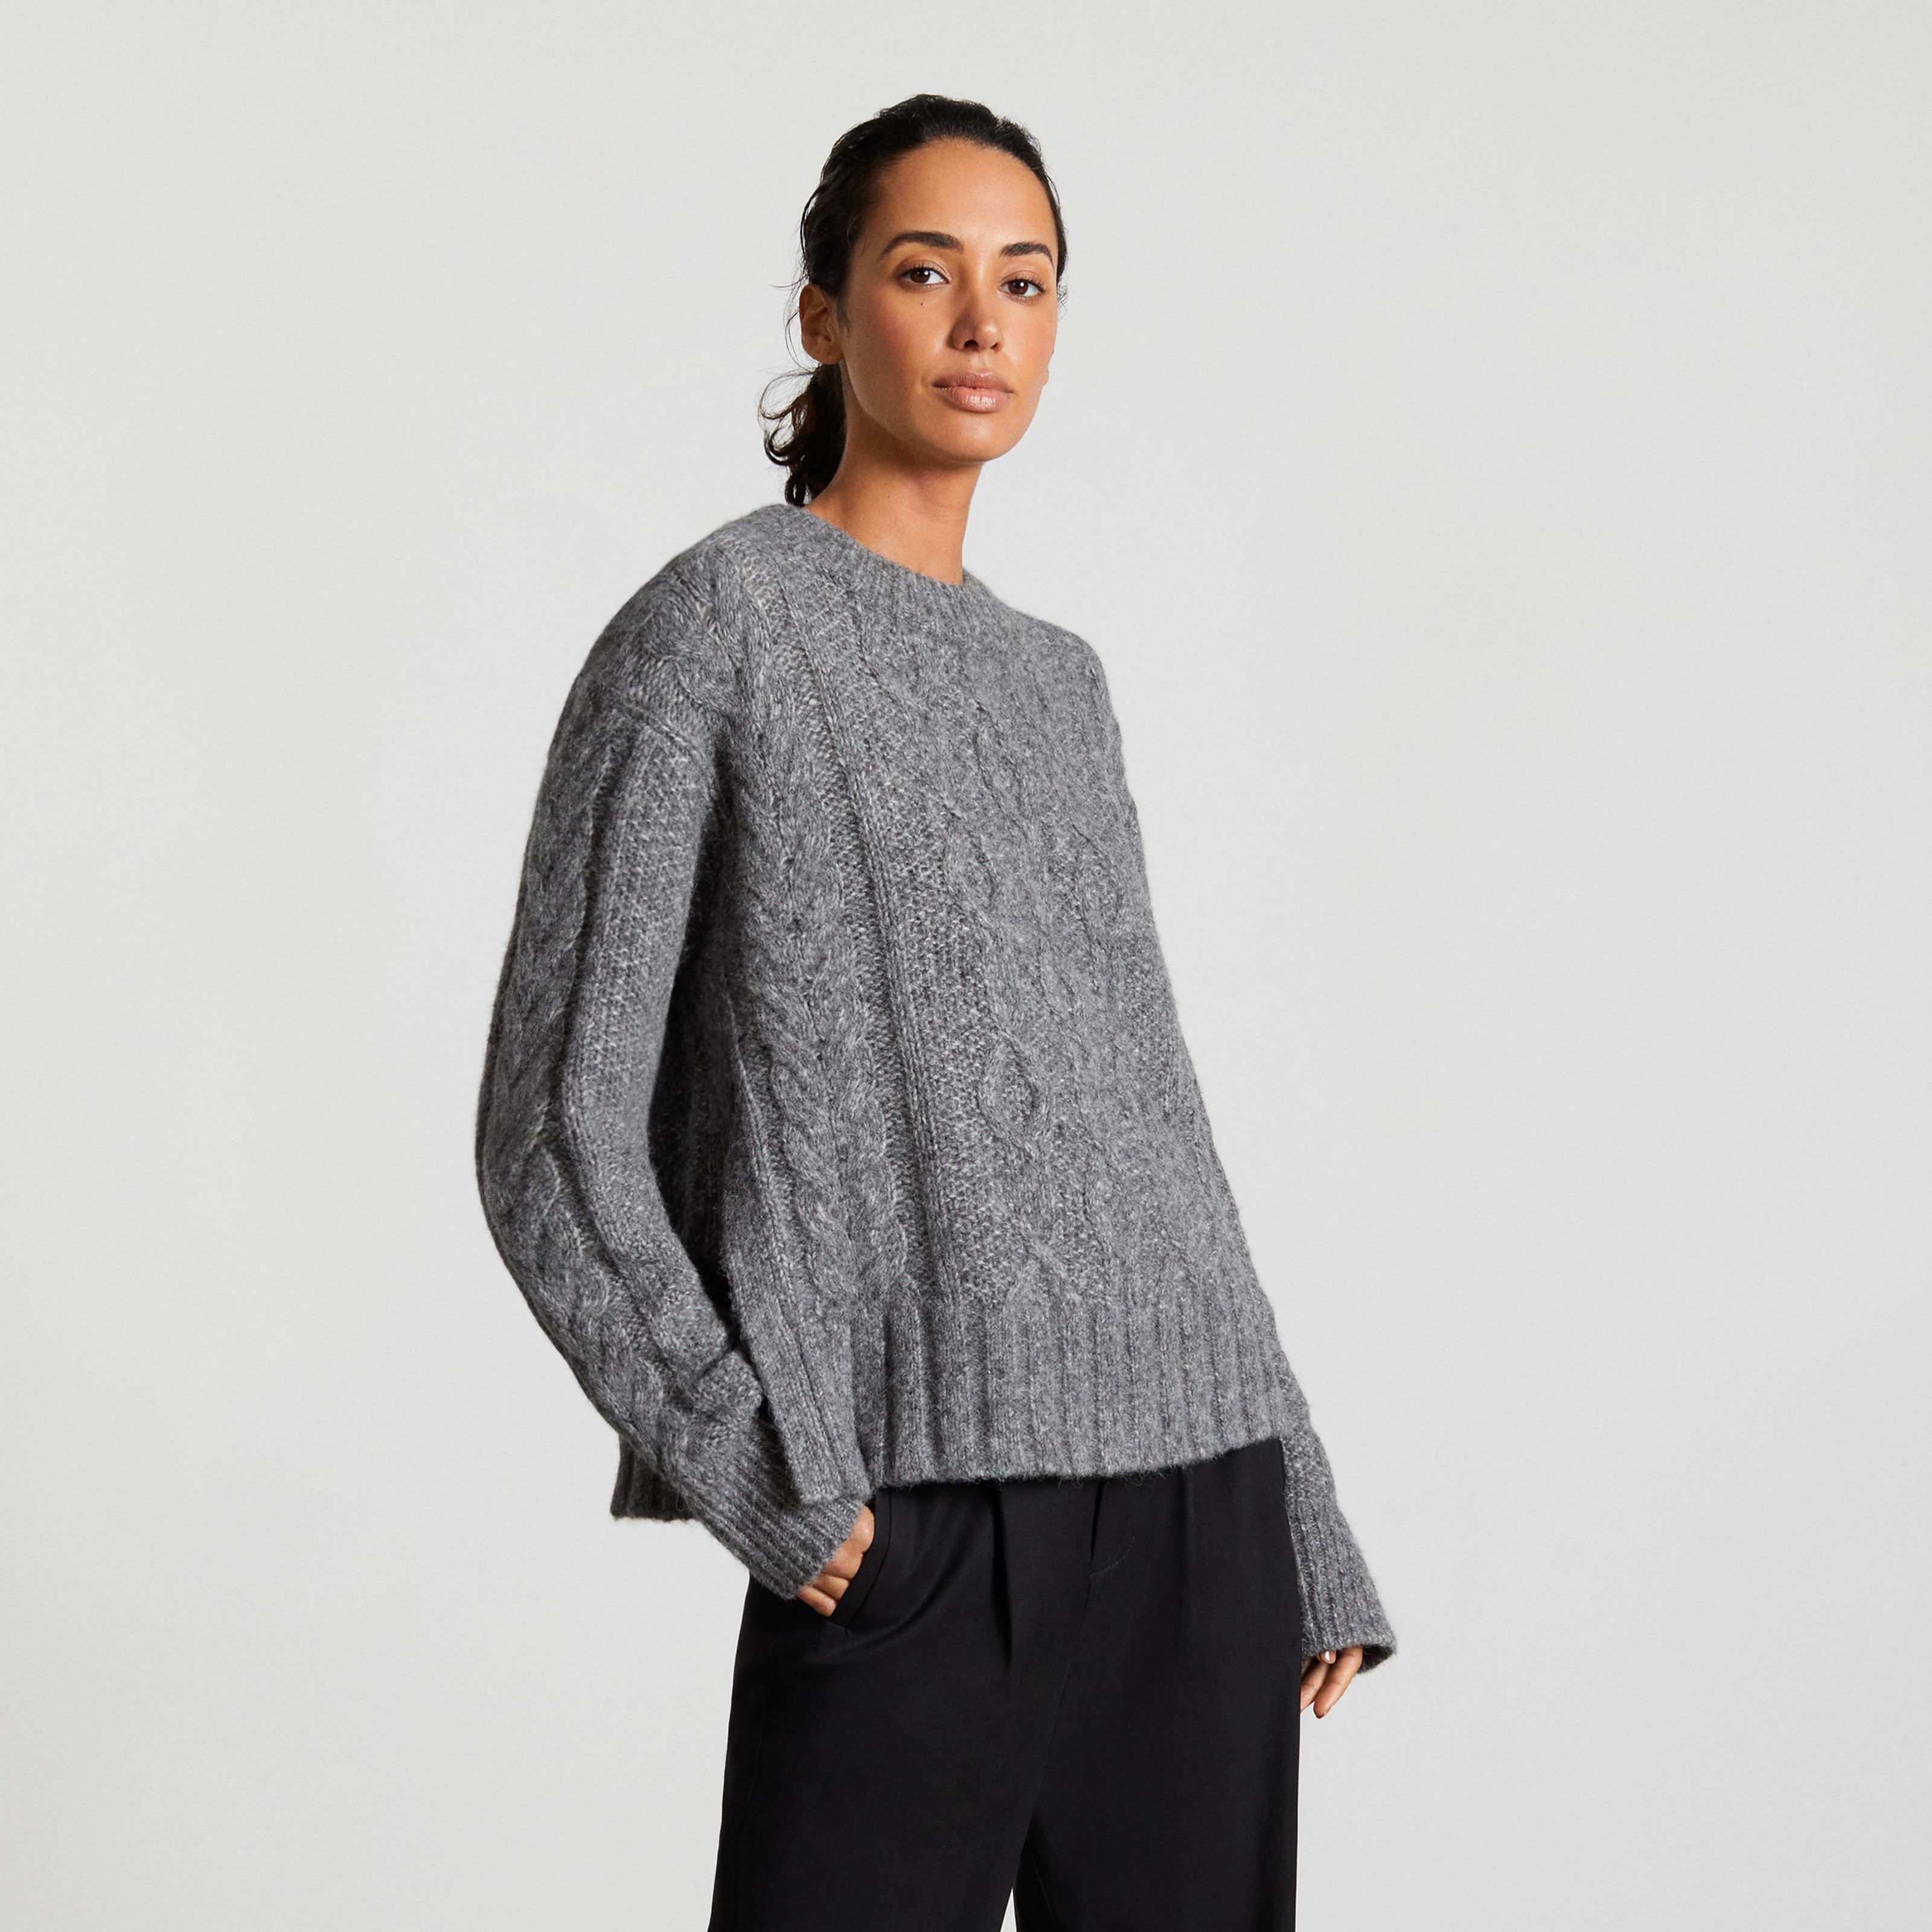 Women's Cloud Cable-Knit Crew Sweater by Everlane in Heathered Charcoal, Size XS | Everlane